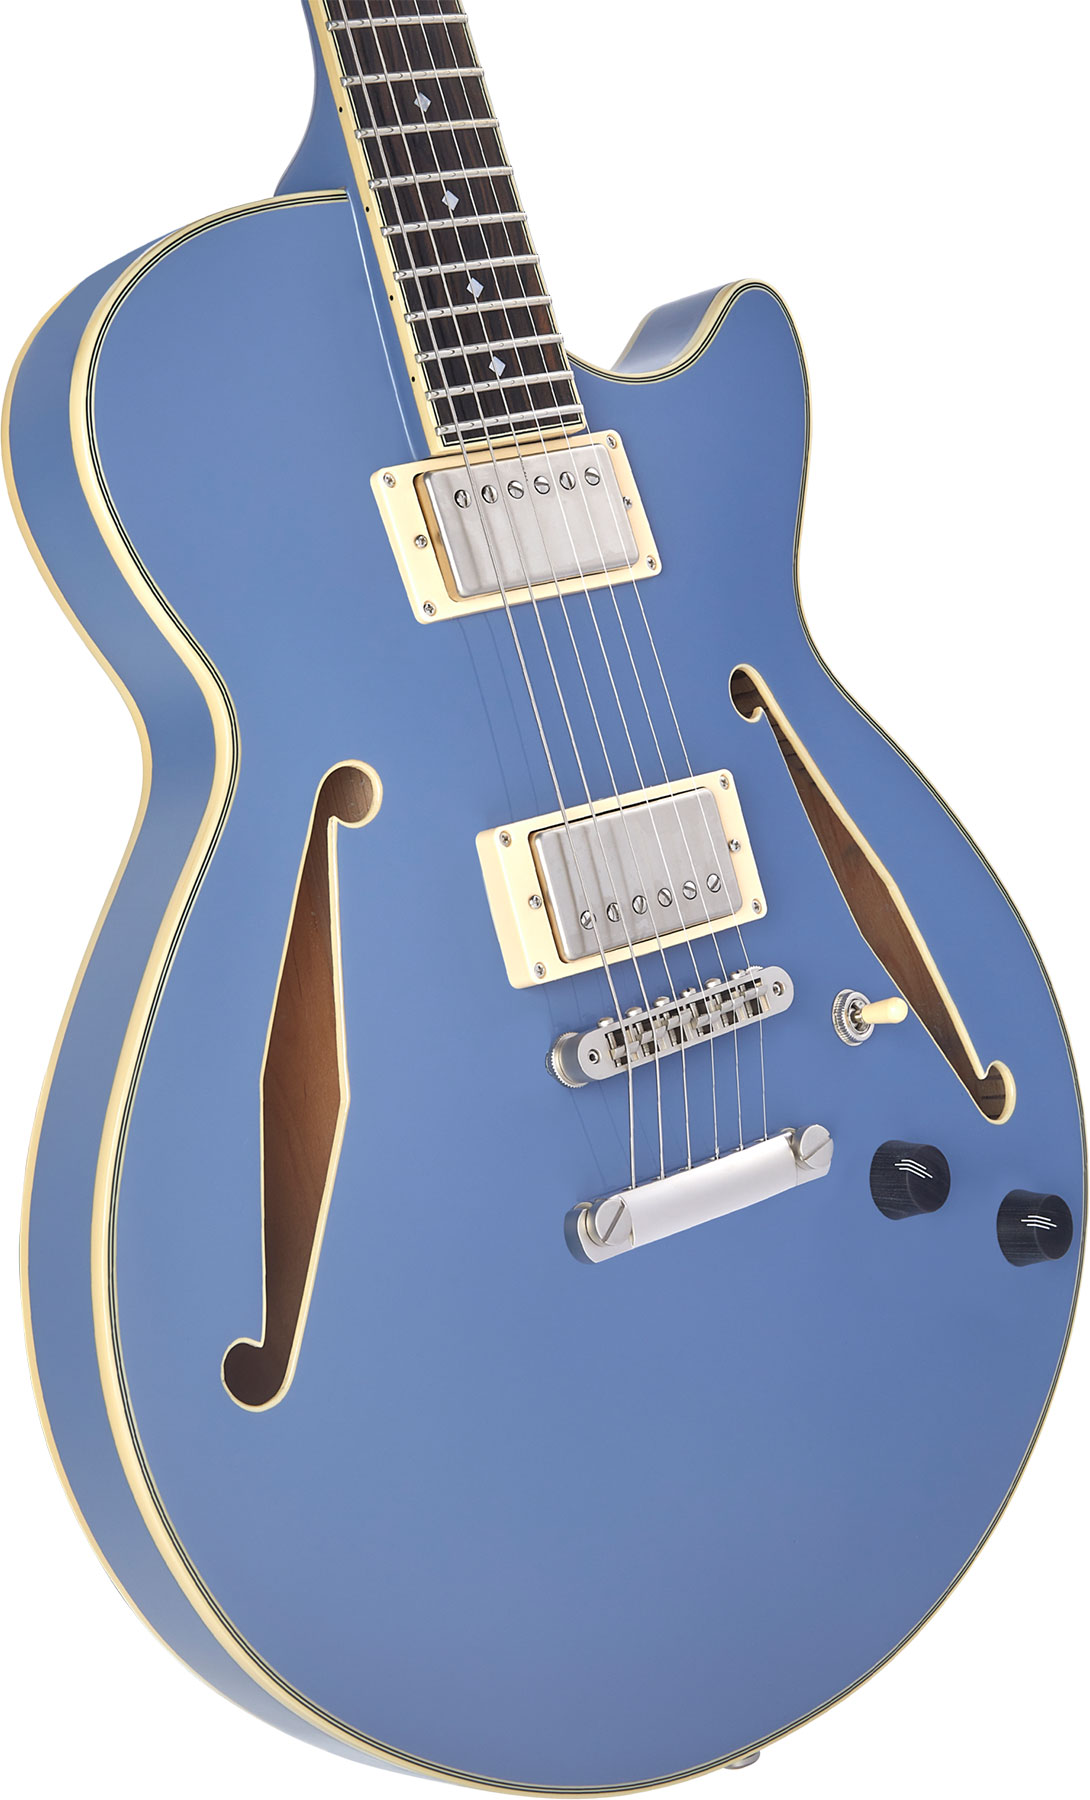 D'angelico Ss Tour Excel 2h Ht Eb - Slate Blue - Semi-hollow electric guitar - Variation 3